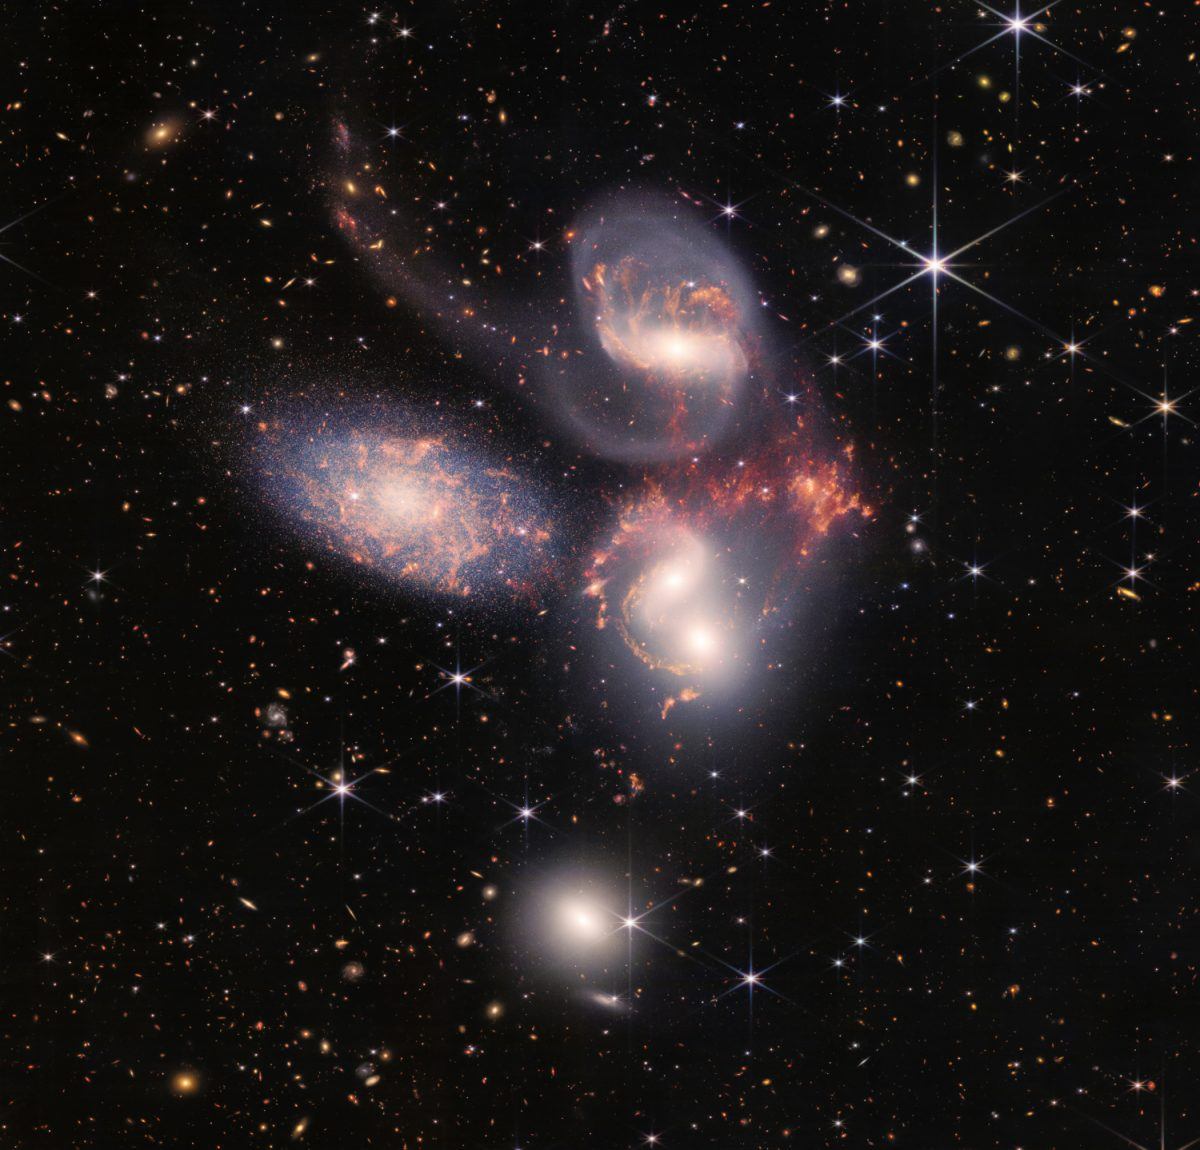 A group of five galaxies side by side, with other stars and galaxies visible in the distance.